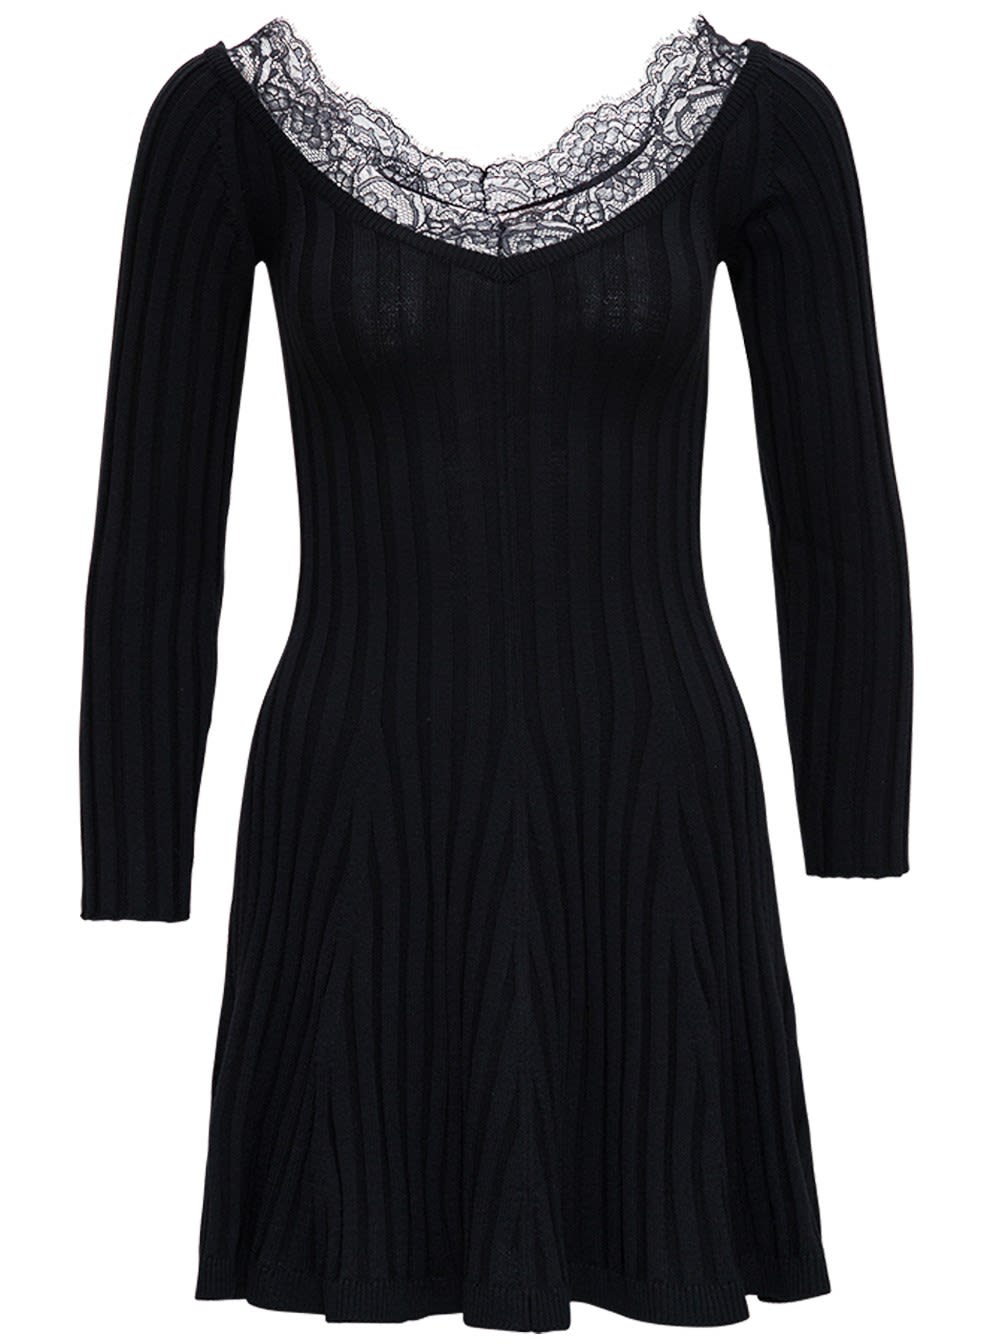 RED Valentino Black Wool And Lace Dress